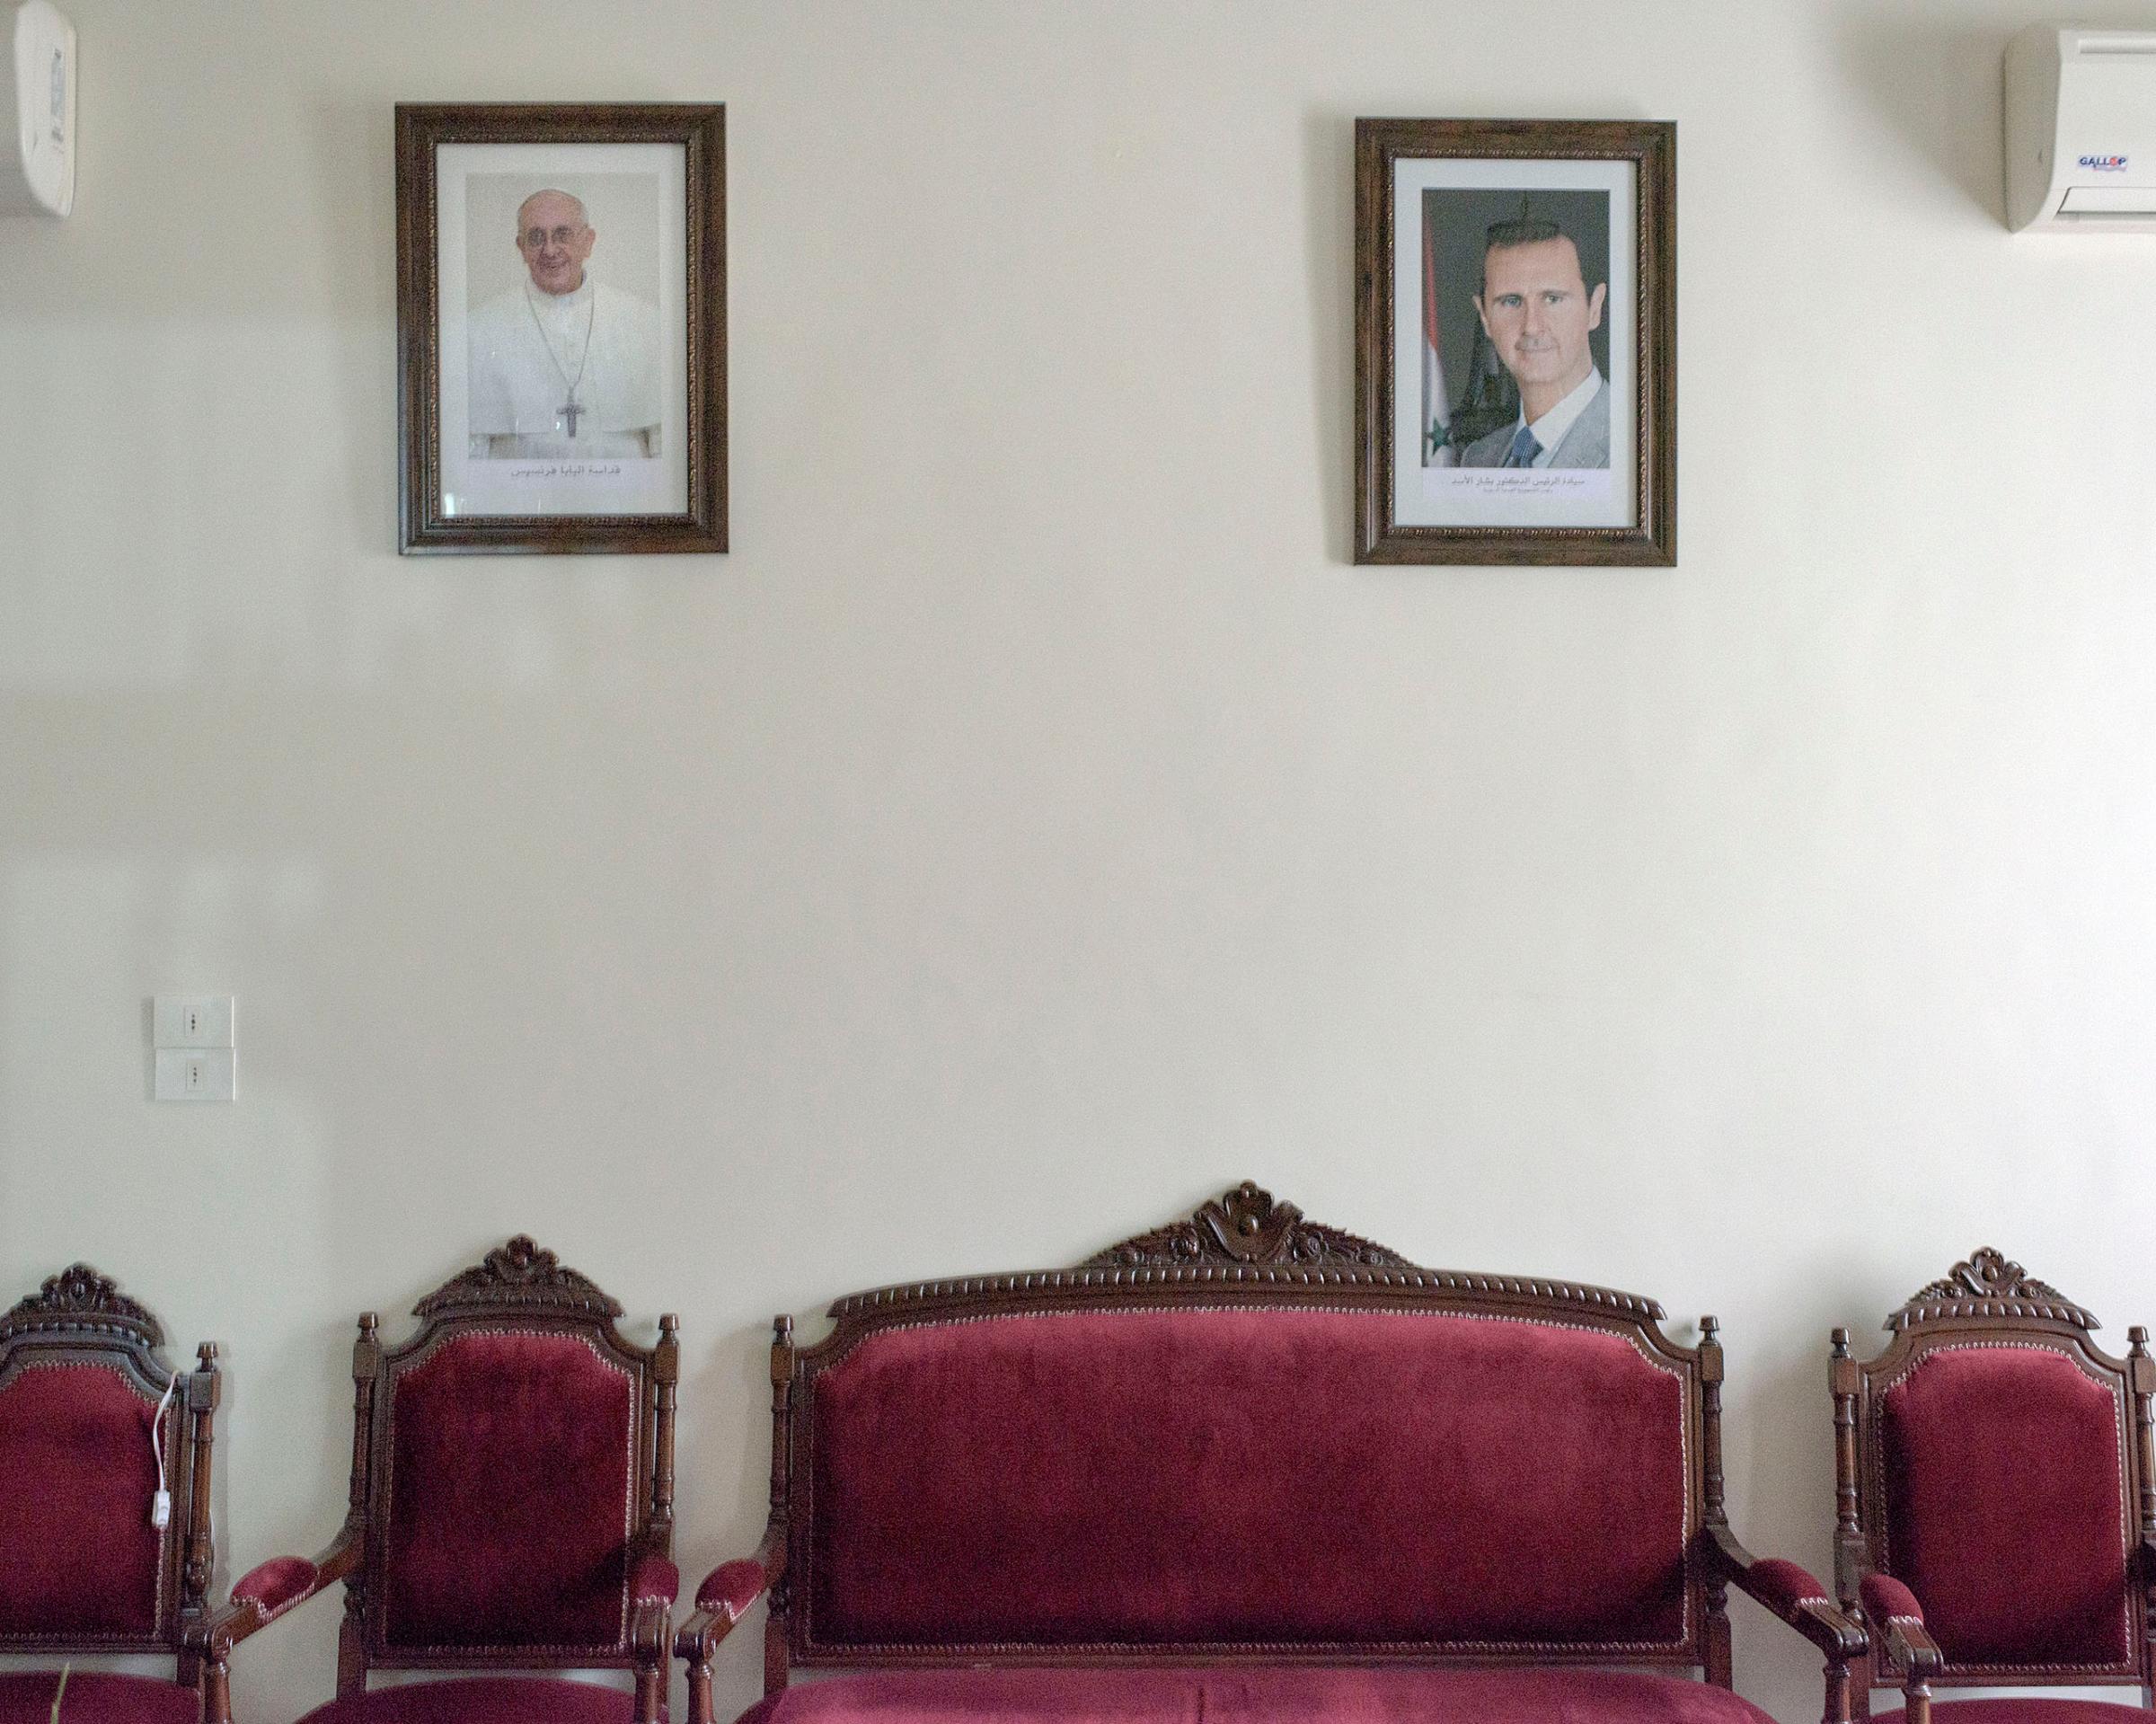 Framed portraits of Pope Francis and Syrian President Bashar Assad hang on a wall inside the offices of the Maronite Bishop of Aleppo, March 2016.